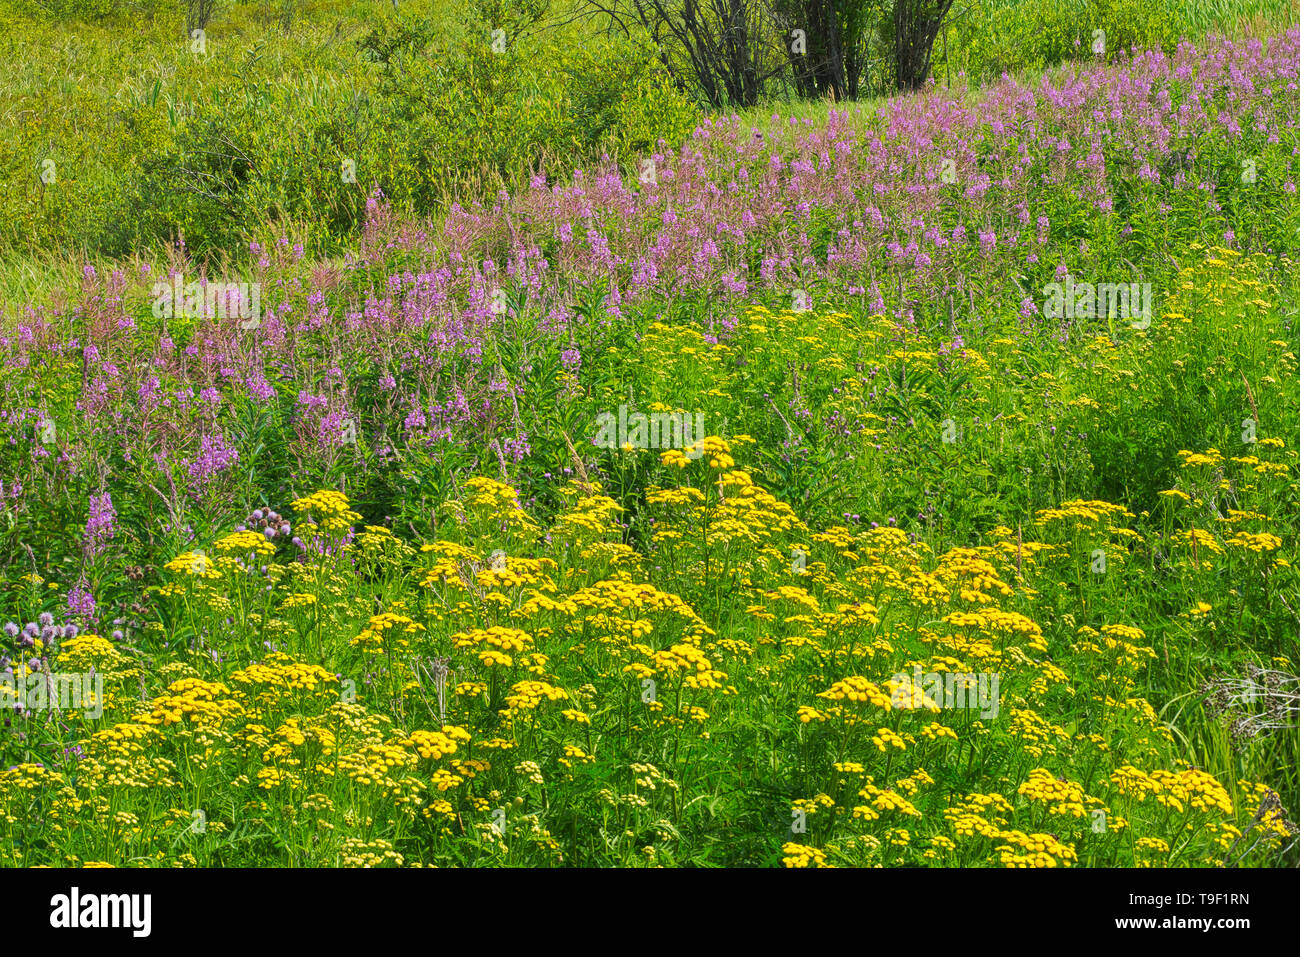 Tansy, Tanacetum vulgare and fireweed (Epilobium sp.) blossoms at edge of boreal forest.  Near Kenora Ontario Canada Stock Photo